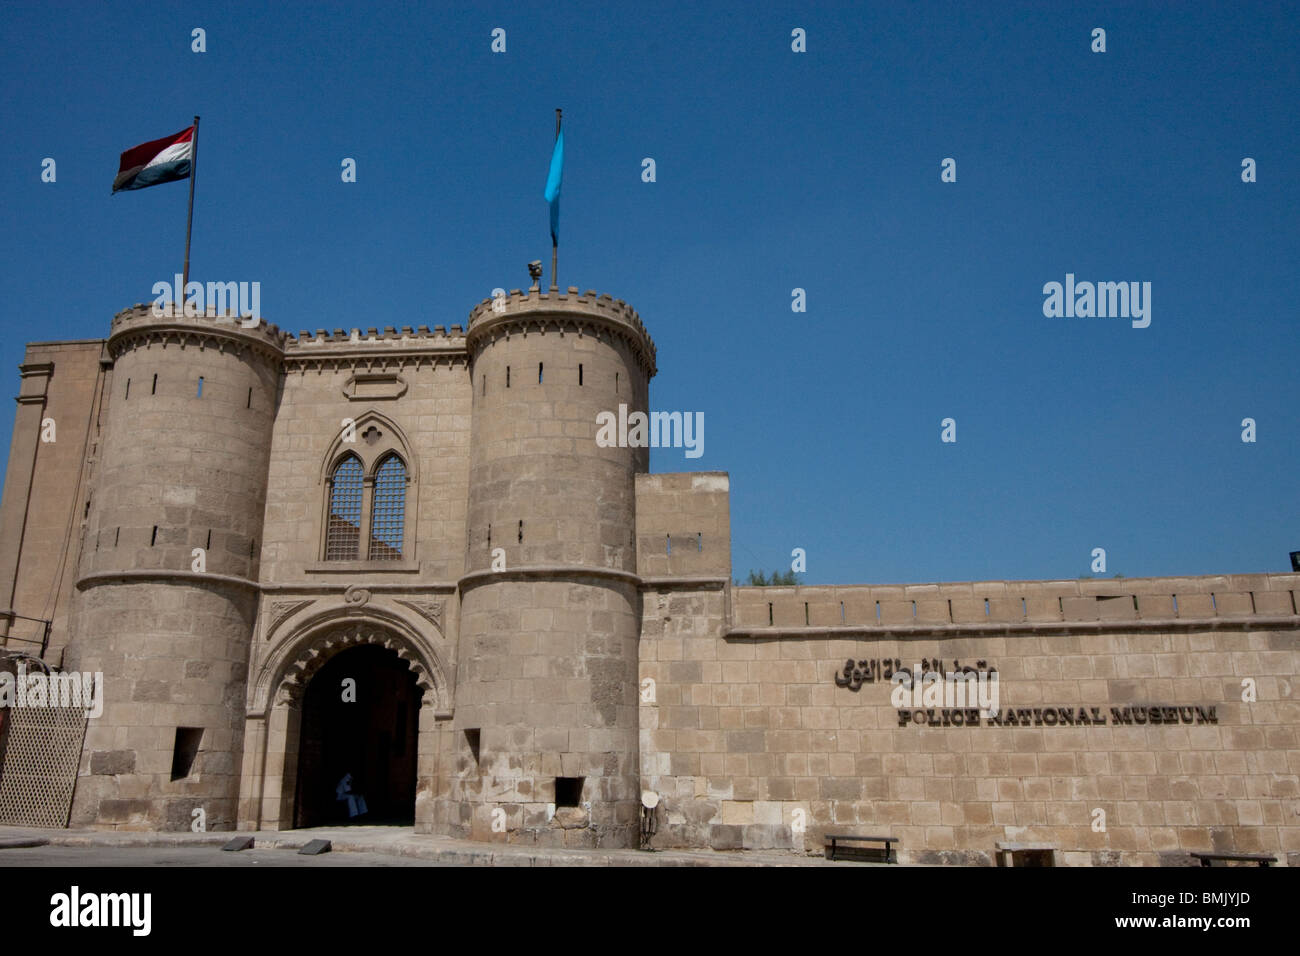 Police National Museum in the Citadel of Cairo, Al Qahirah, Egypt Stock Photo